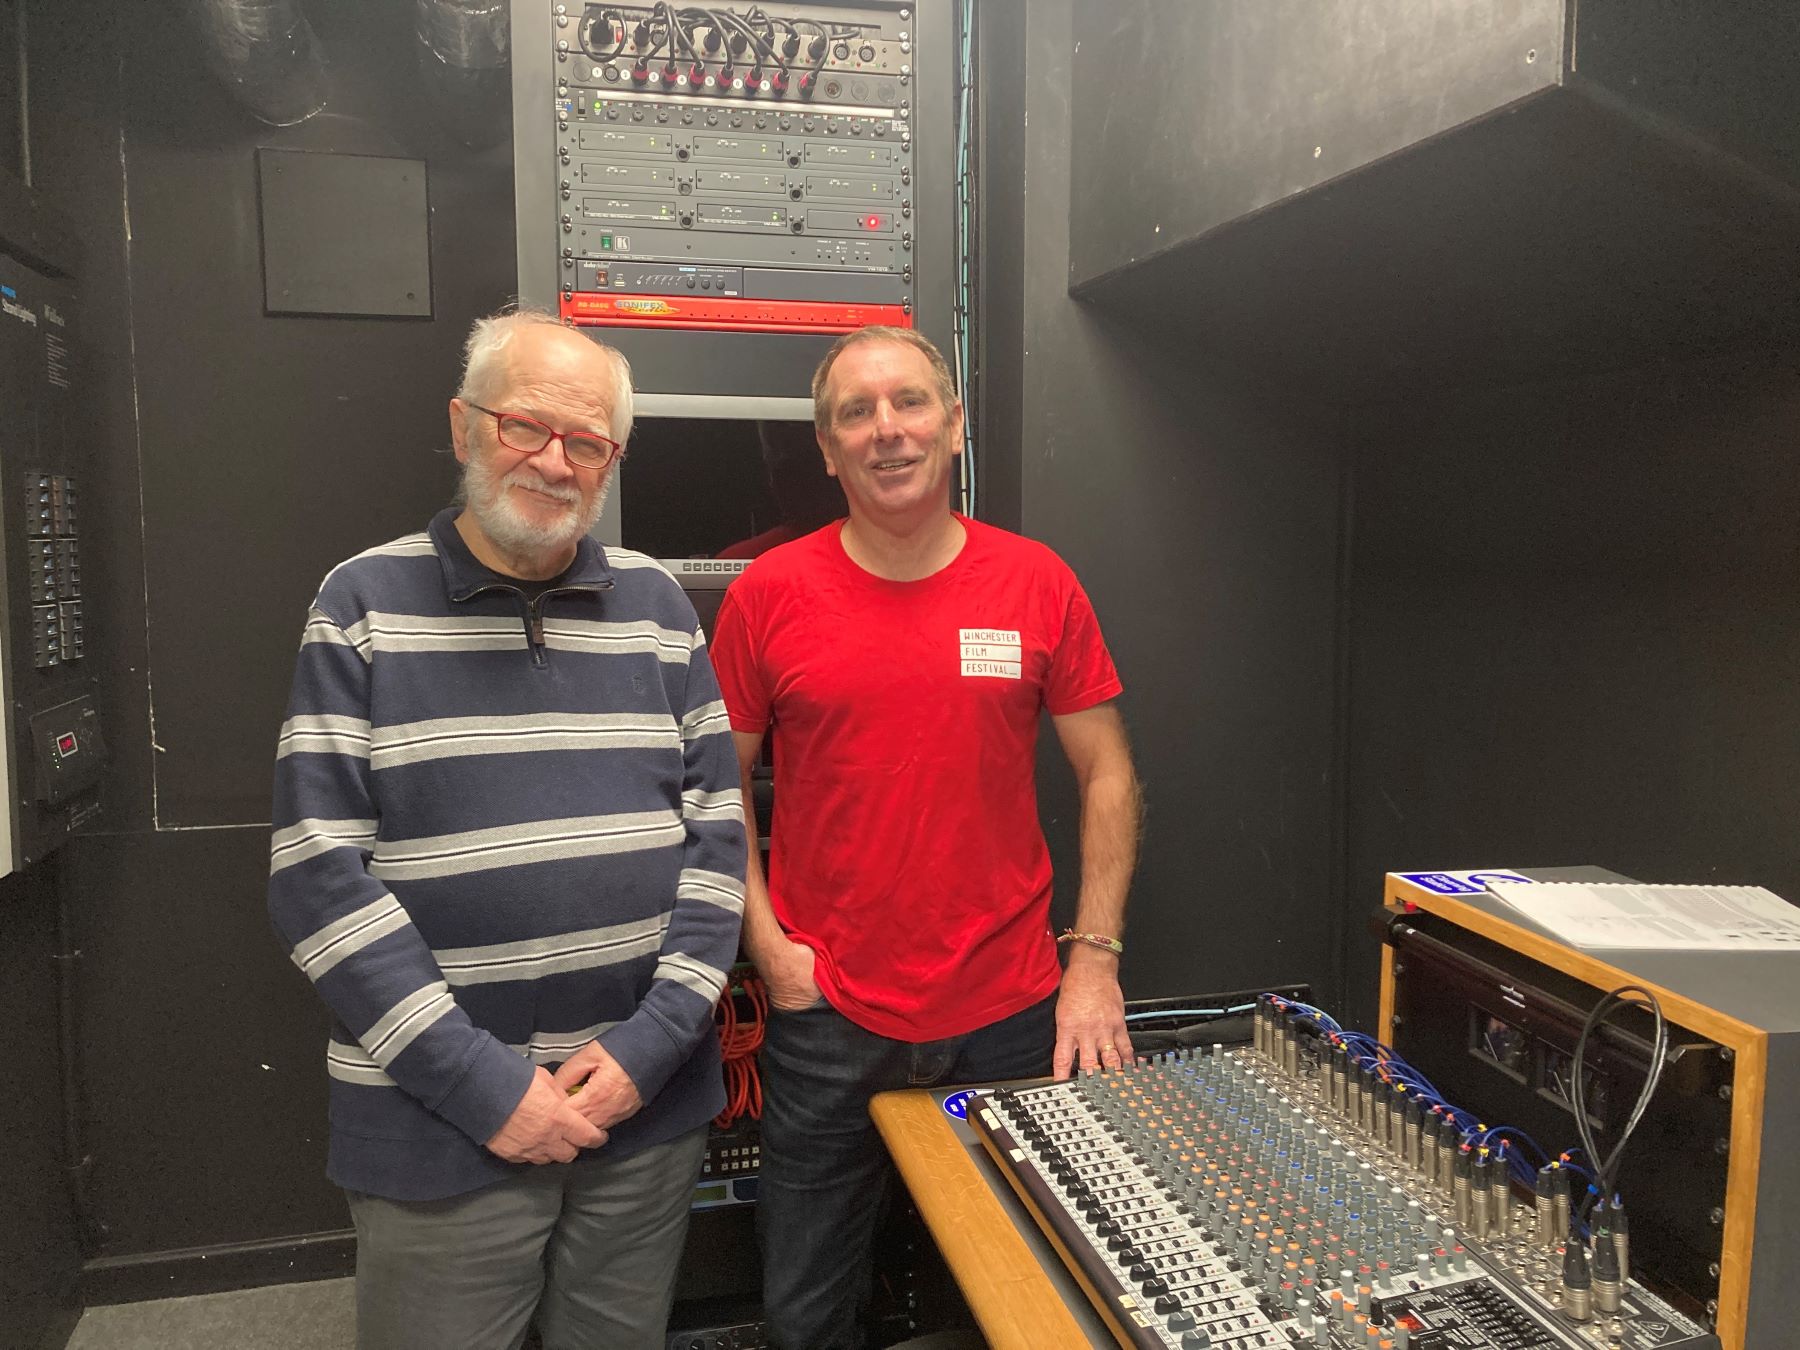 One older man with beard and glasses and a middle aged man in red t shirt next to mixing desk media studio